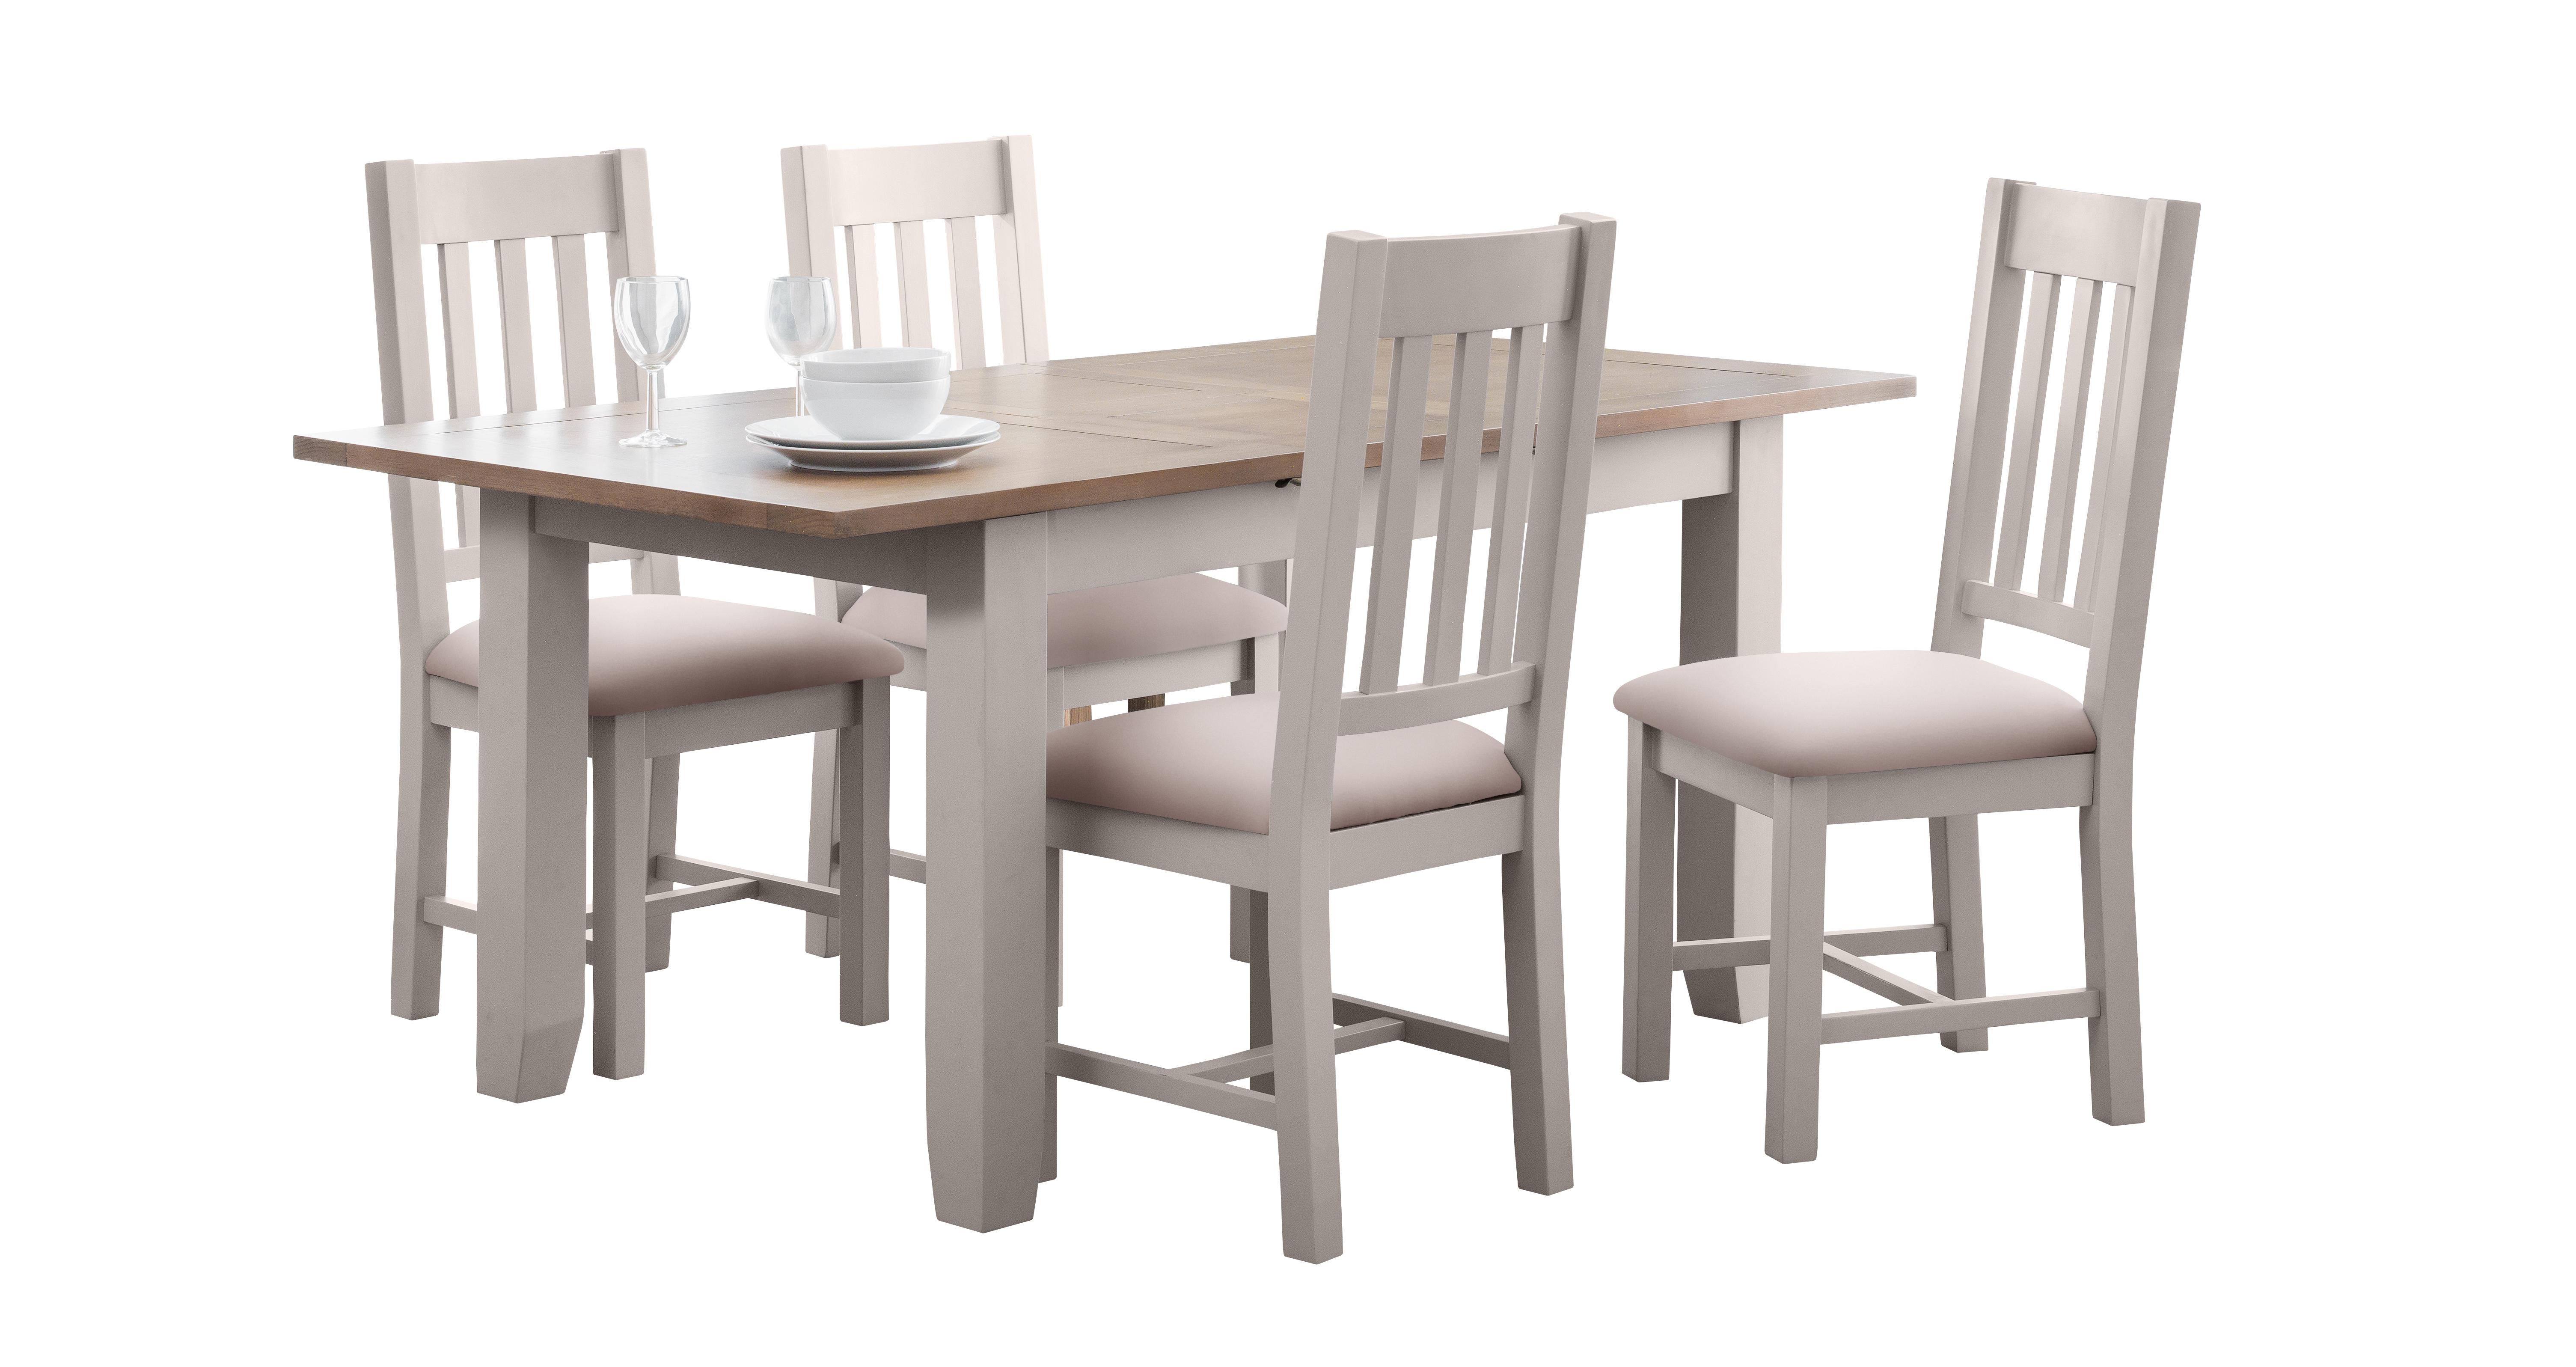 Zennor Dining Medium Extending Table, Dining Table And Chairs Clearance Dfs